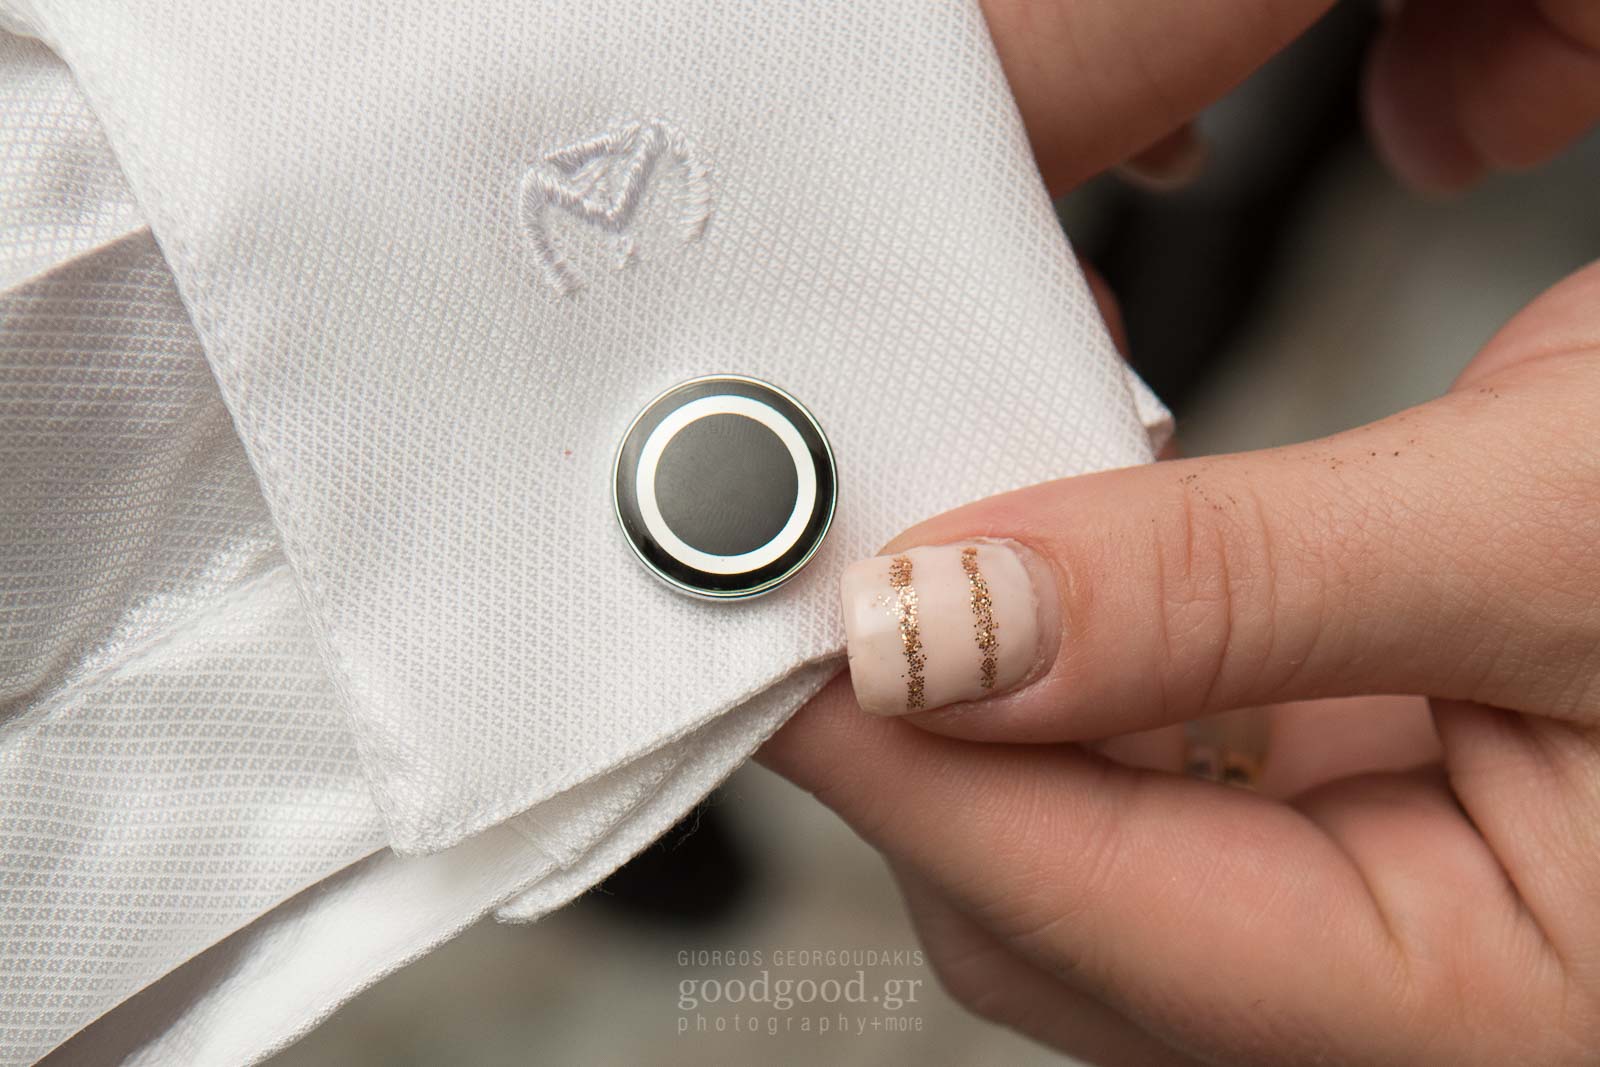 Close up photo of a woomans hand holding the groom's cufflink